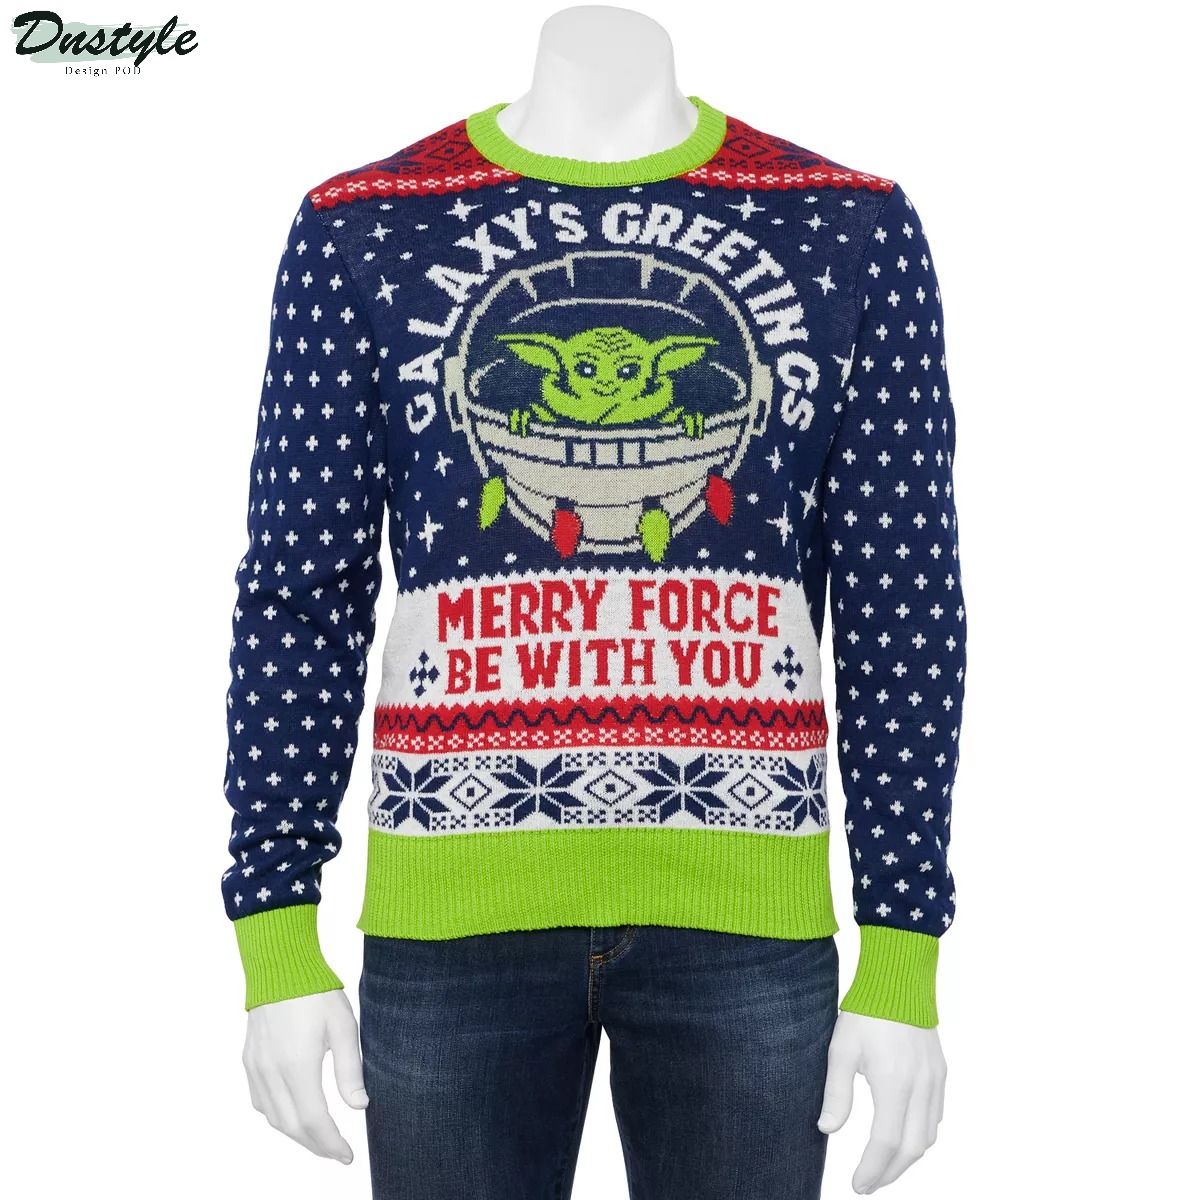 Star Wars The Mandalorian galaxys greetings merry force be with you ugly christmas sweater